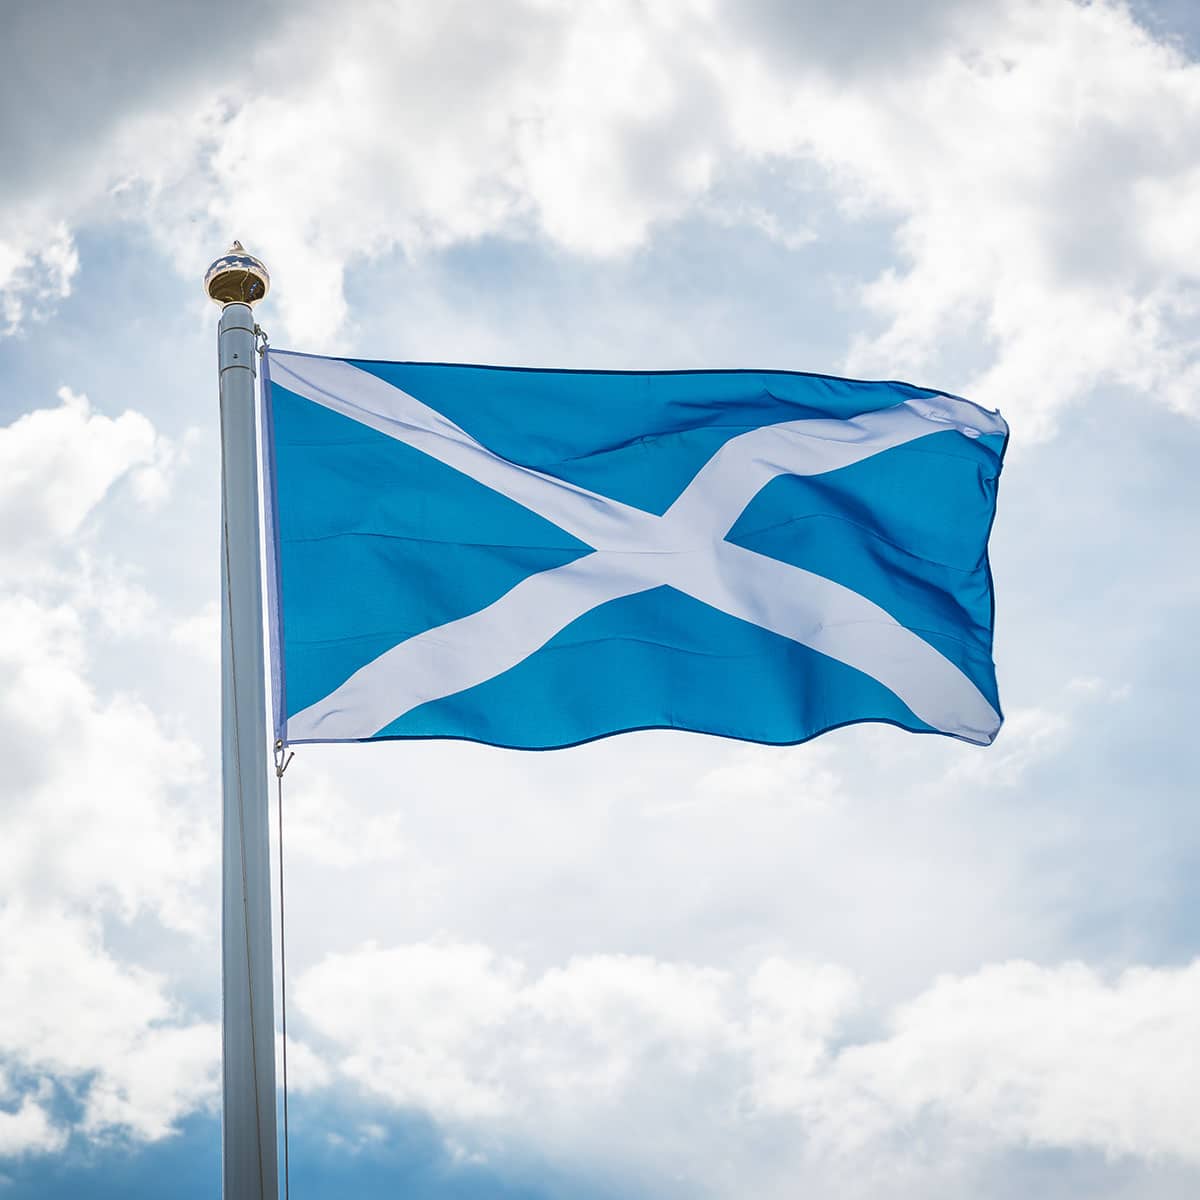 A scottish flag flying in the wind.